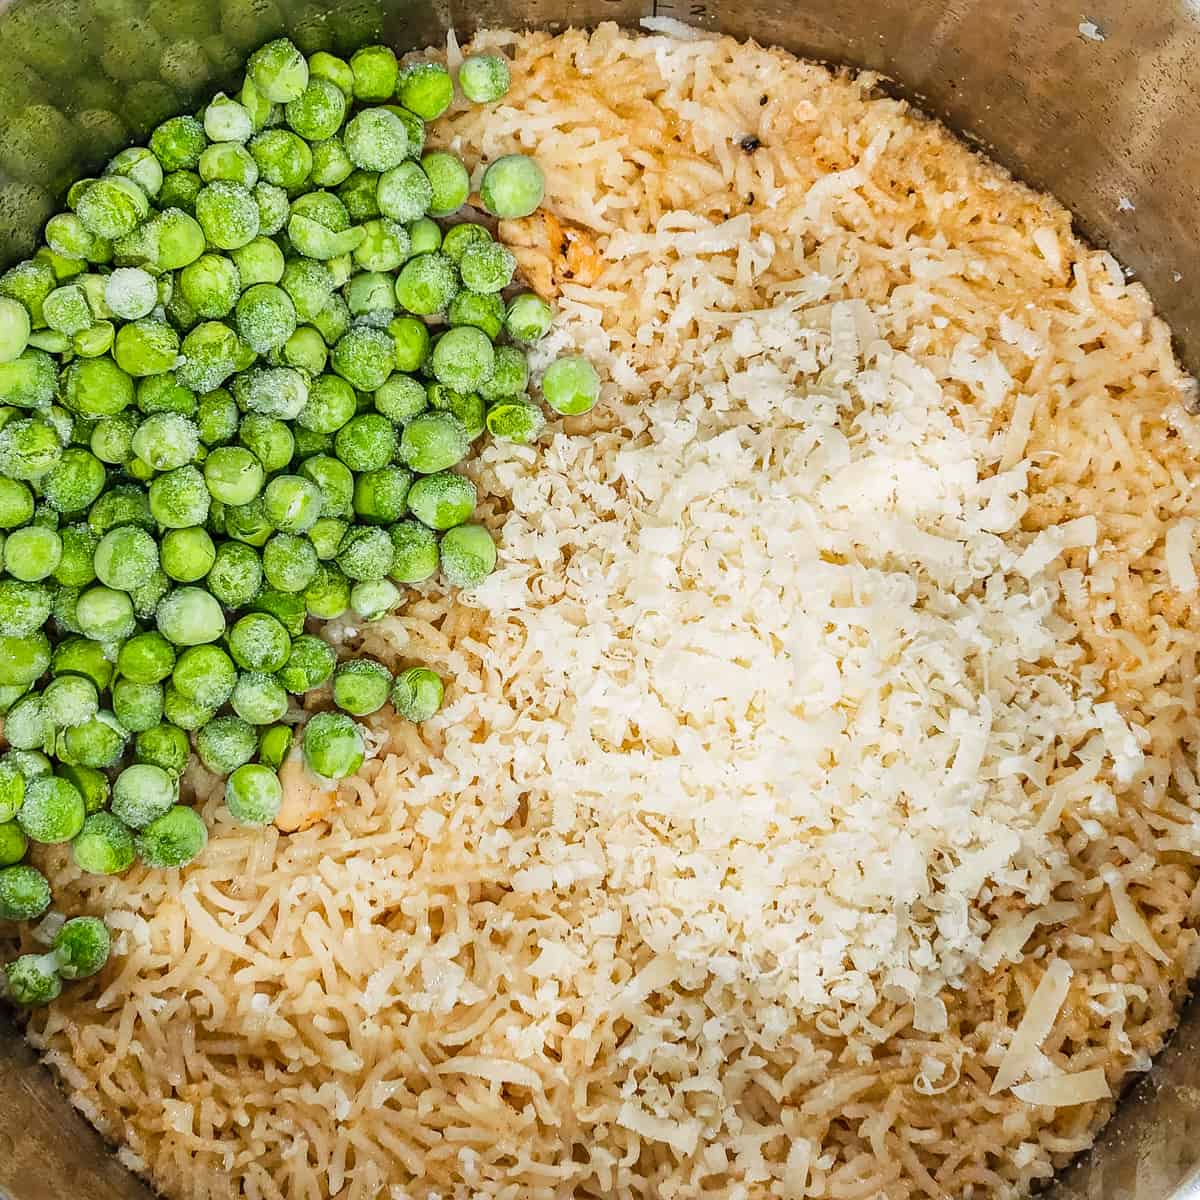 Instant pot chicken and rice shown after pressure cooking and adding the peas and cheese.